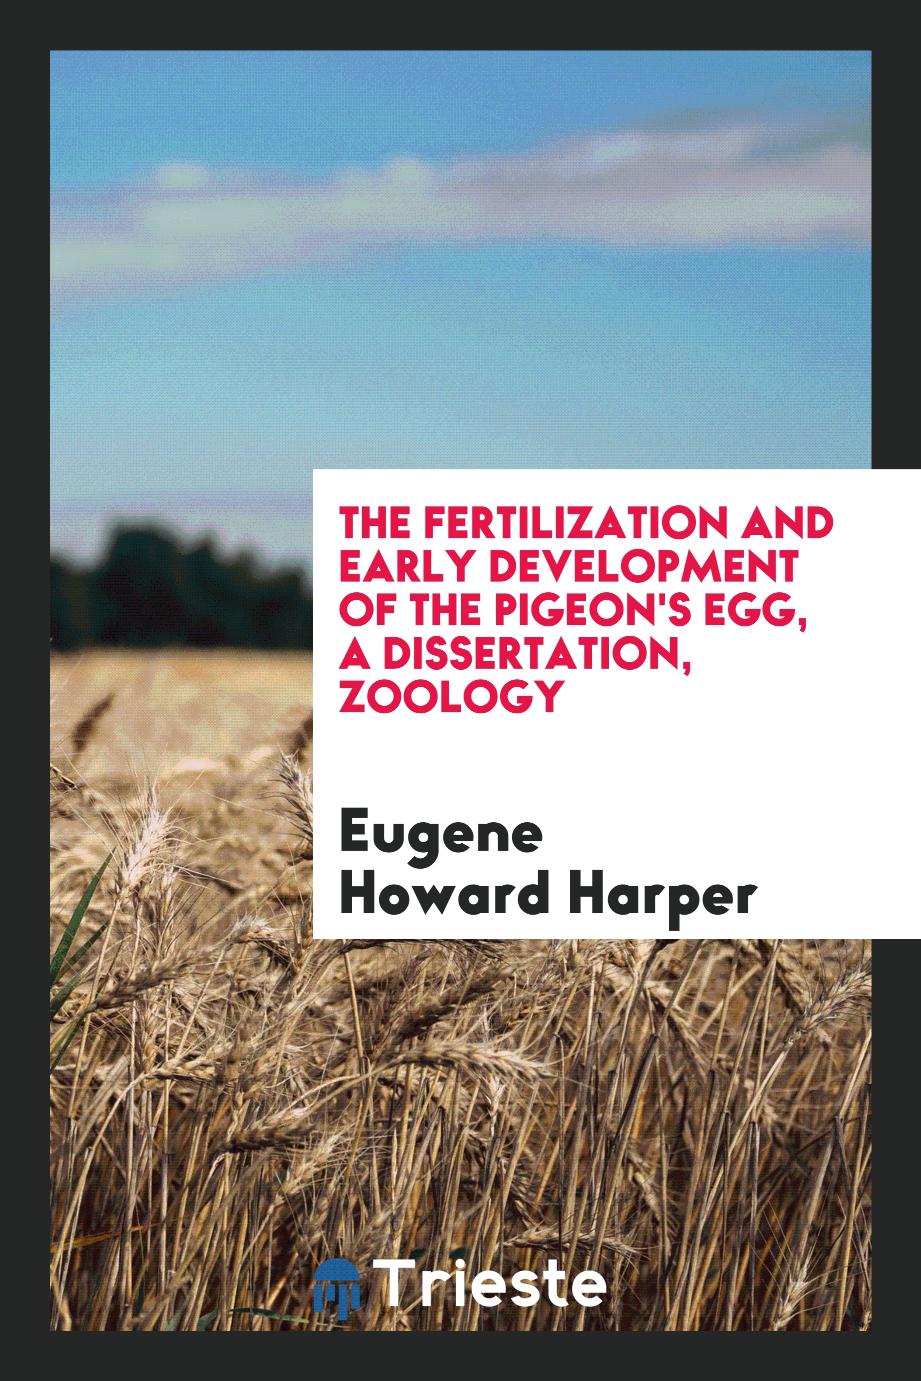 The fertilization and early development of the pigeon's egg, A Dissertation, Zoology